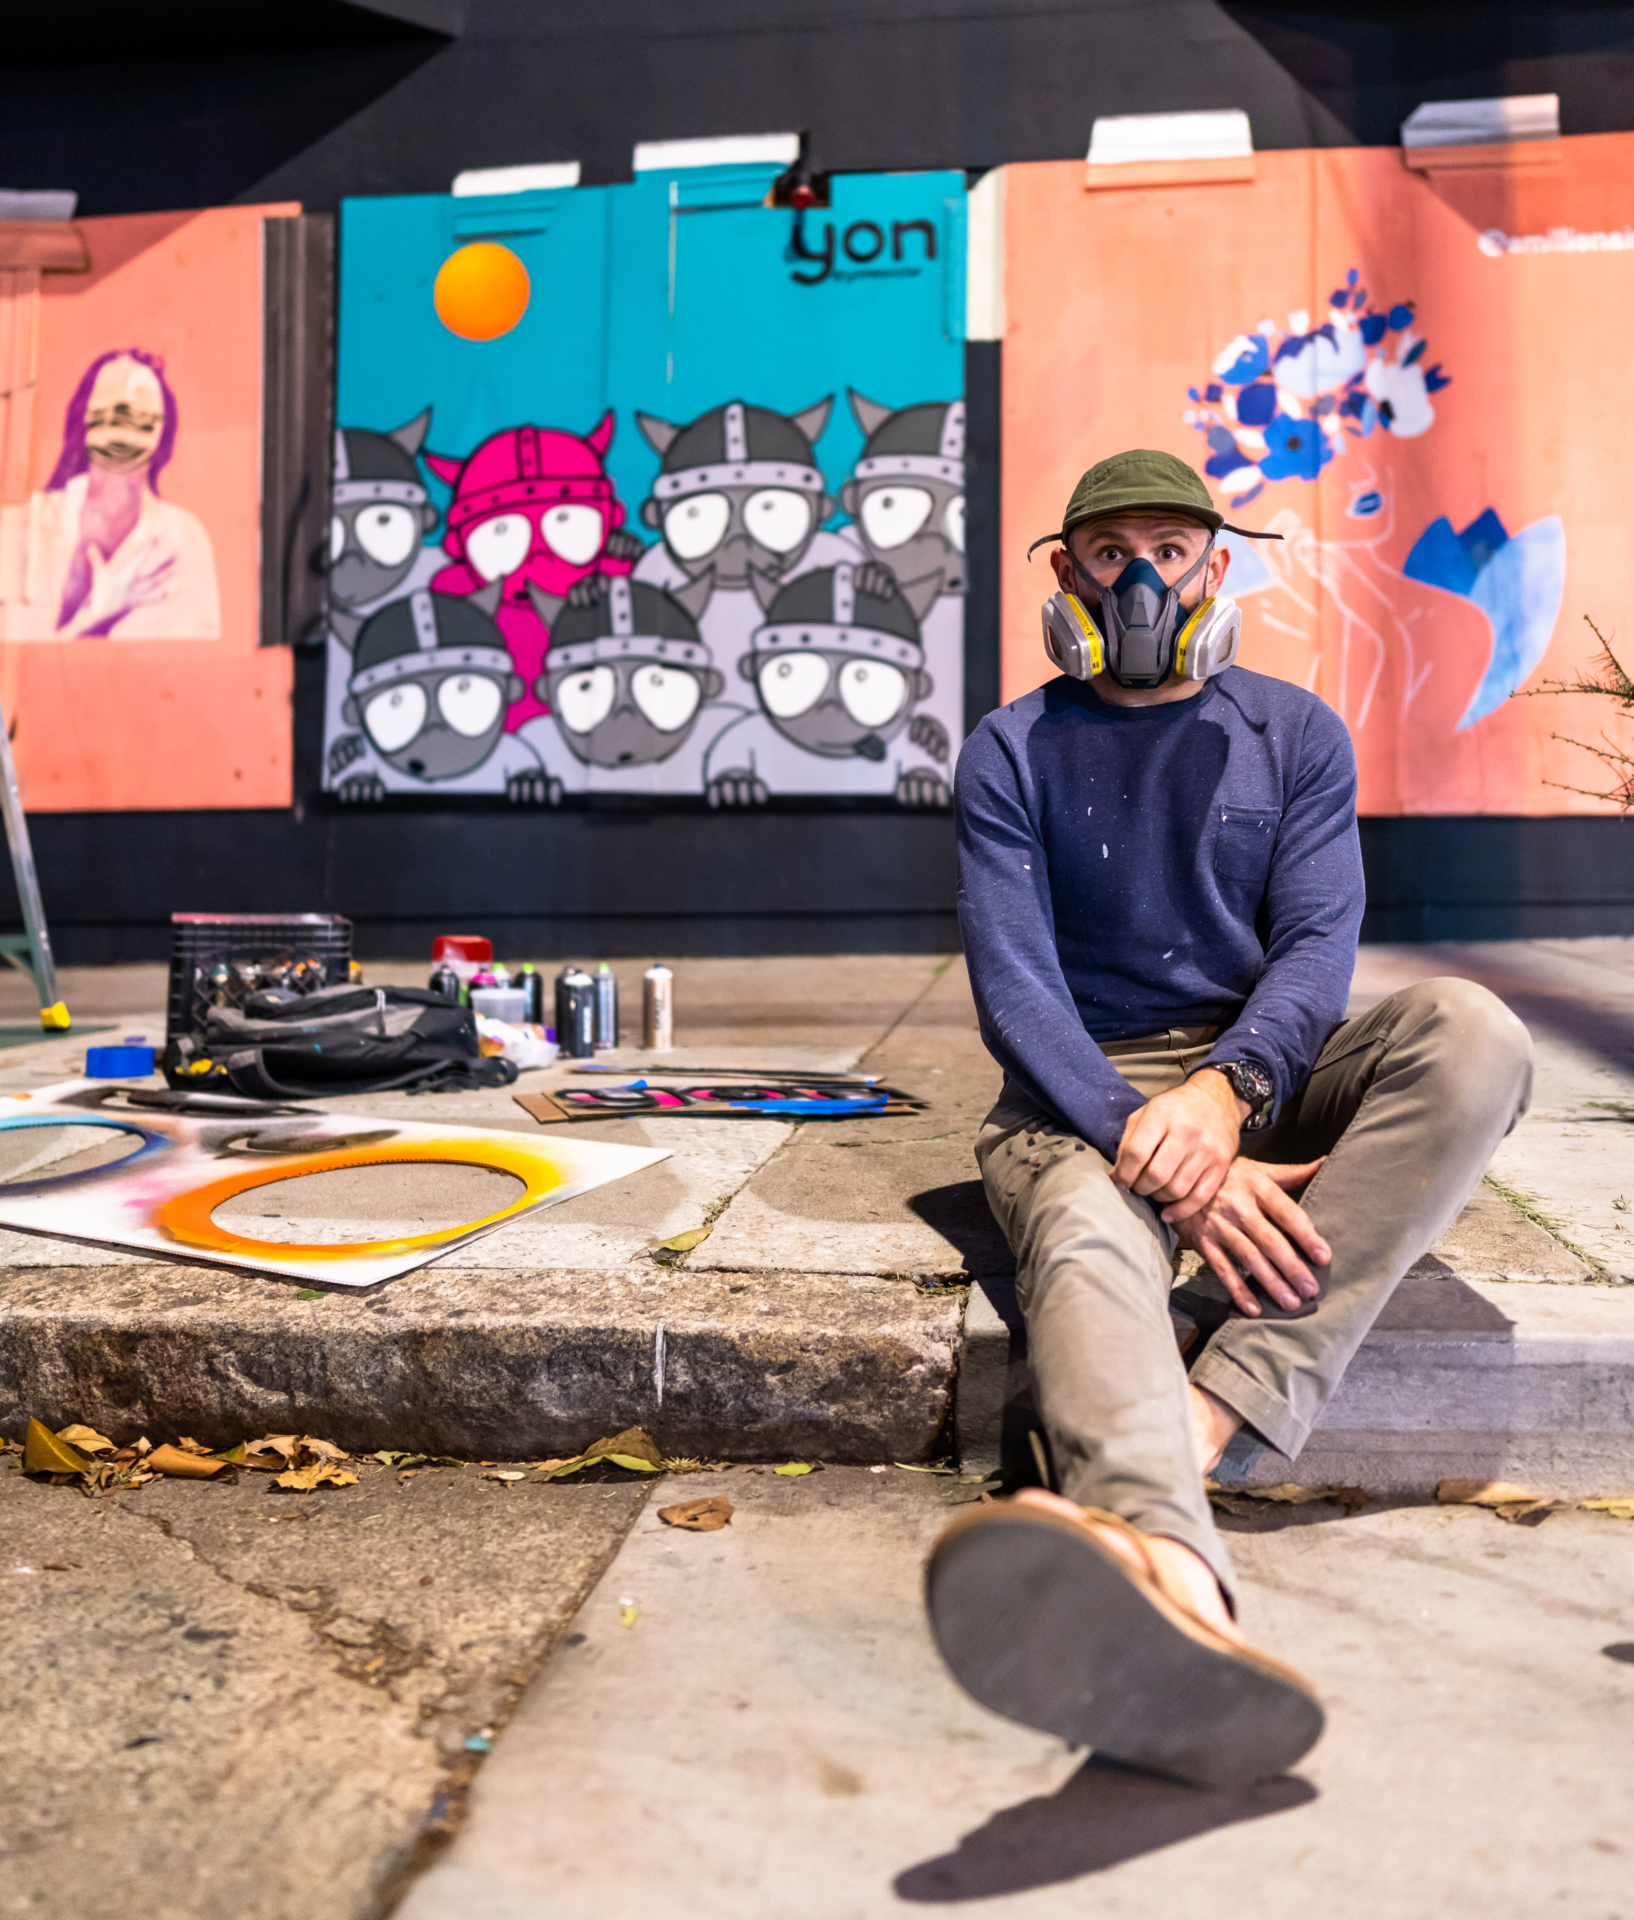 Yonmeister sitting in front of his artwork